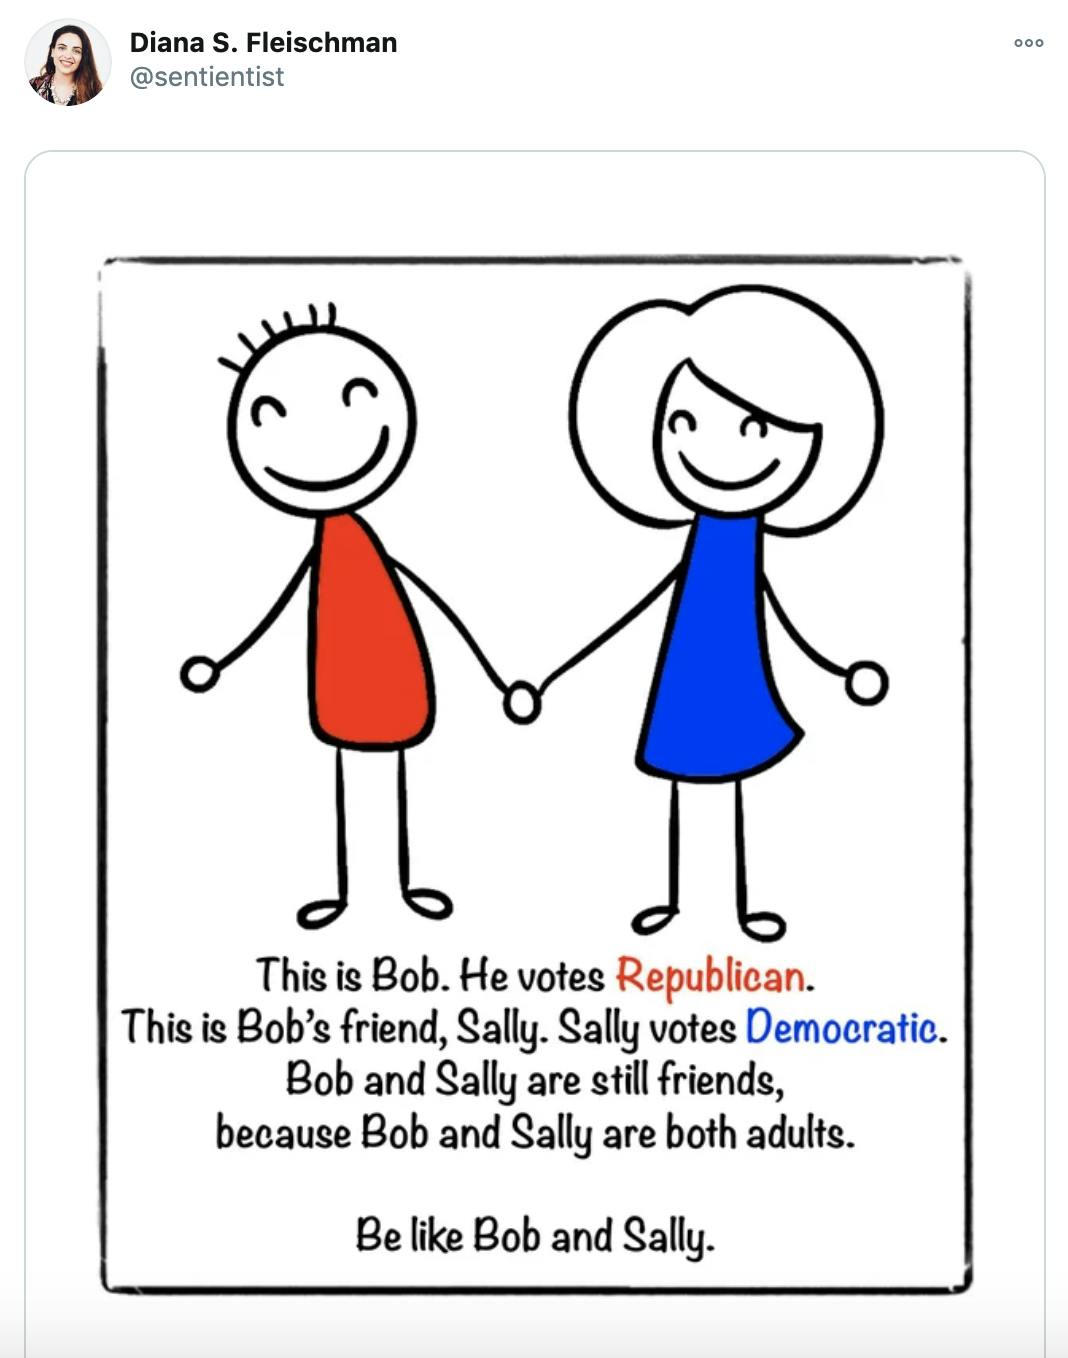 Picture of two stick figures, a man in a red top and a woman in a blue top with text meant to look handwritten that says 'This is Bob. He voted Republican. This is Bob's friend, Sally. Sally votes democrat. Bob and Sally are still friends, because Bob and Sally are both adults. Be like Bob and Sally'